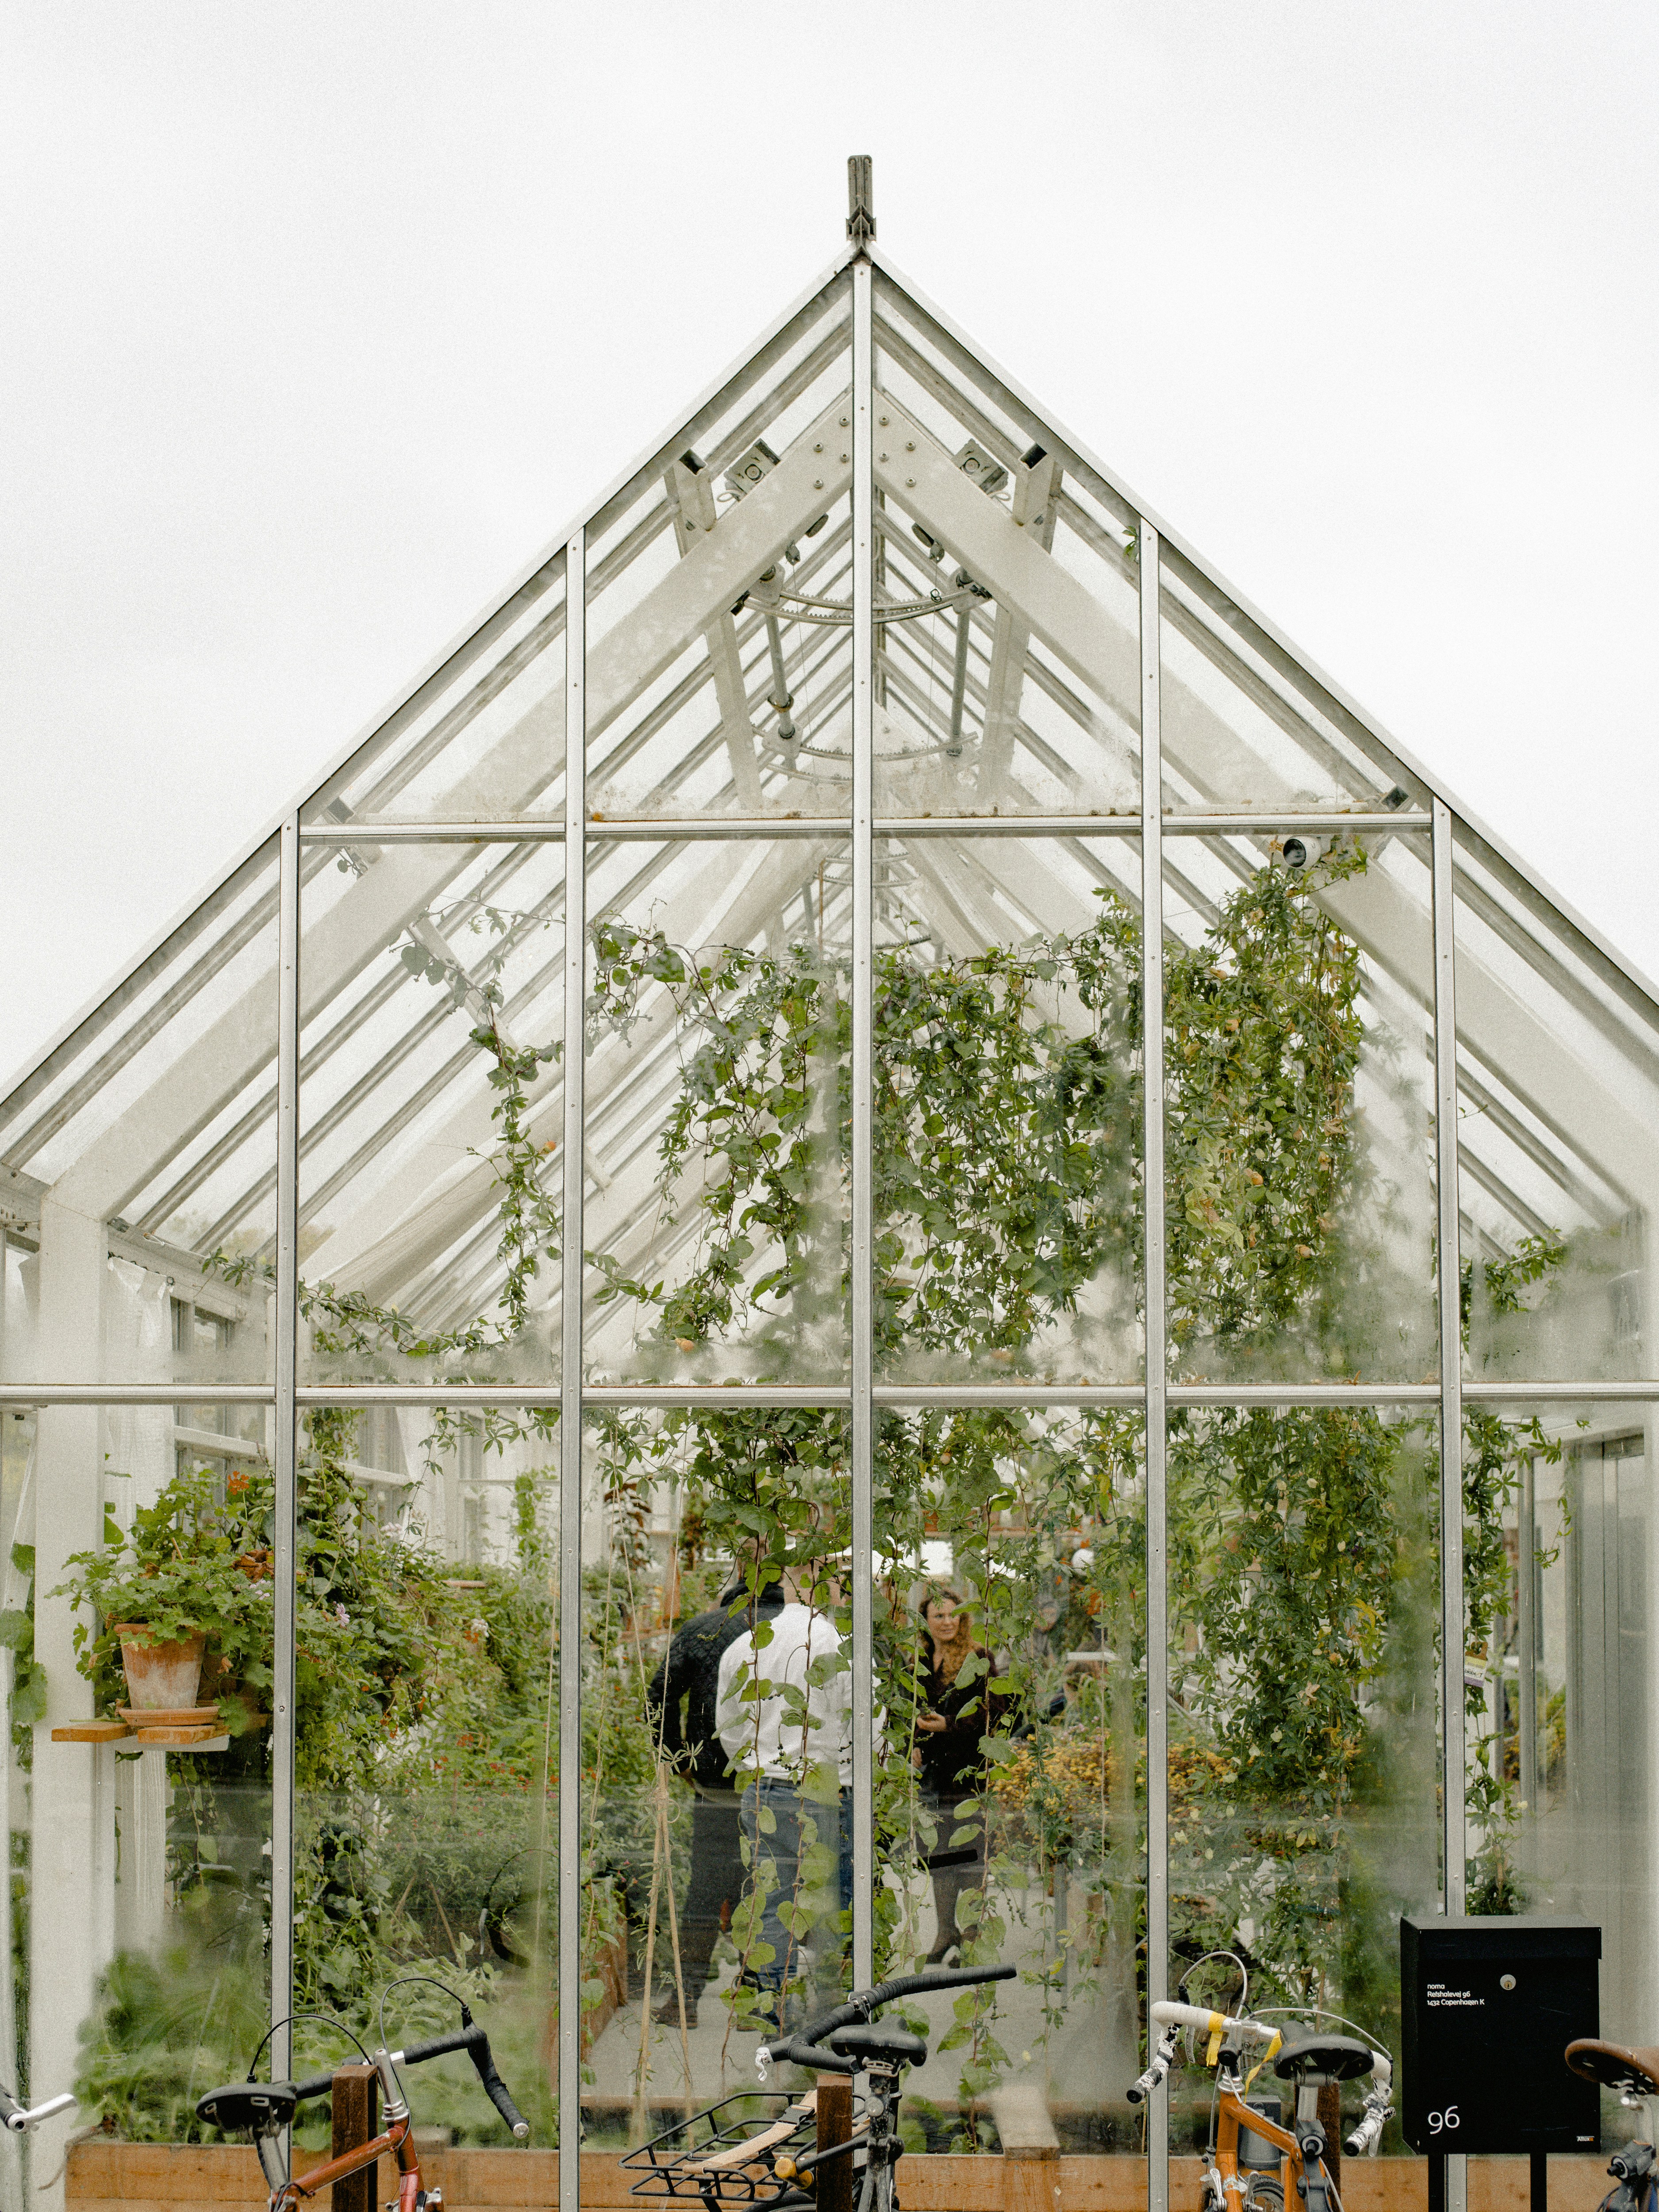 A Greenhouse With Plants Growing In It